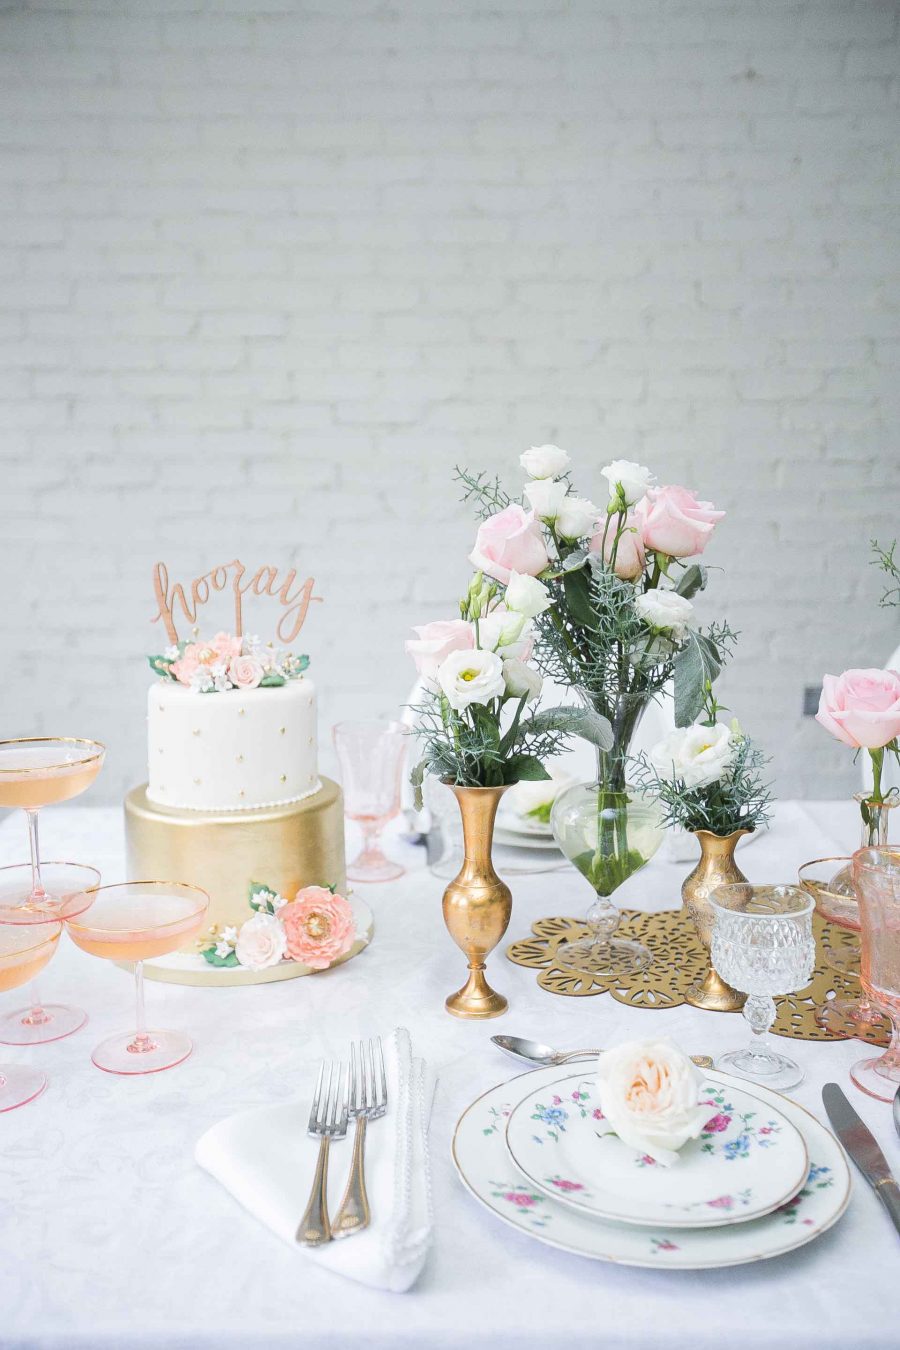 Host a Winter Bridal Shower with BHLDN by FashionableHostess.com21